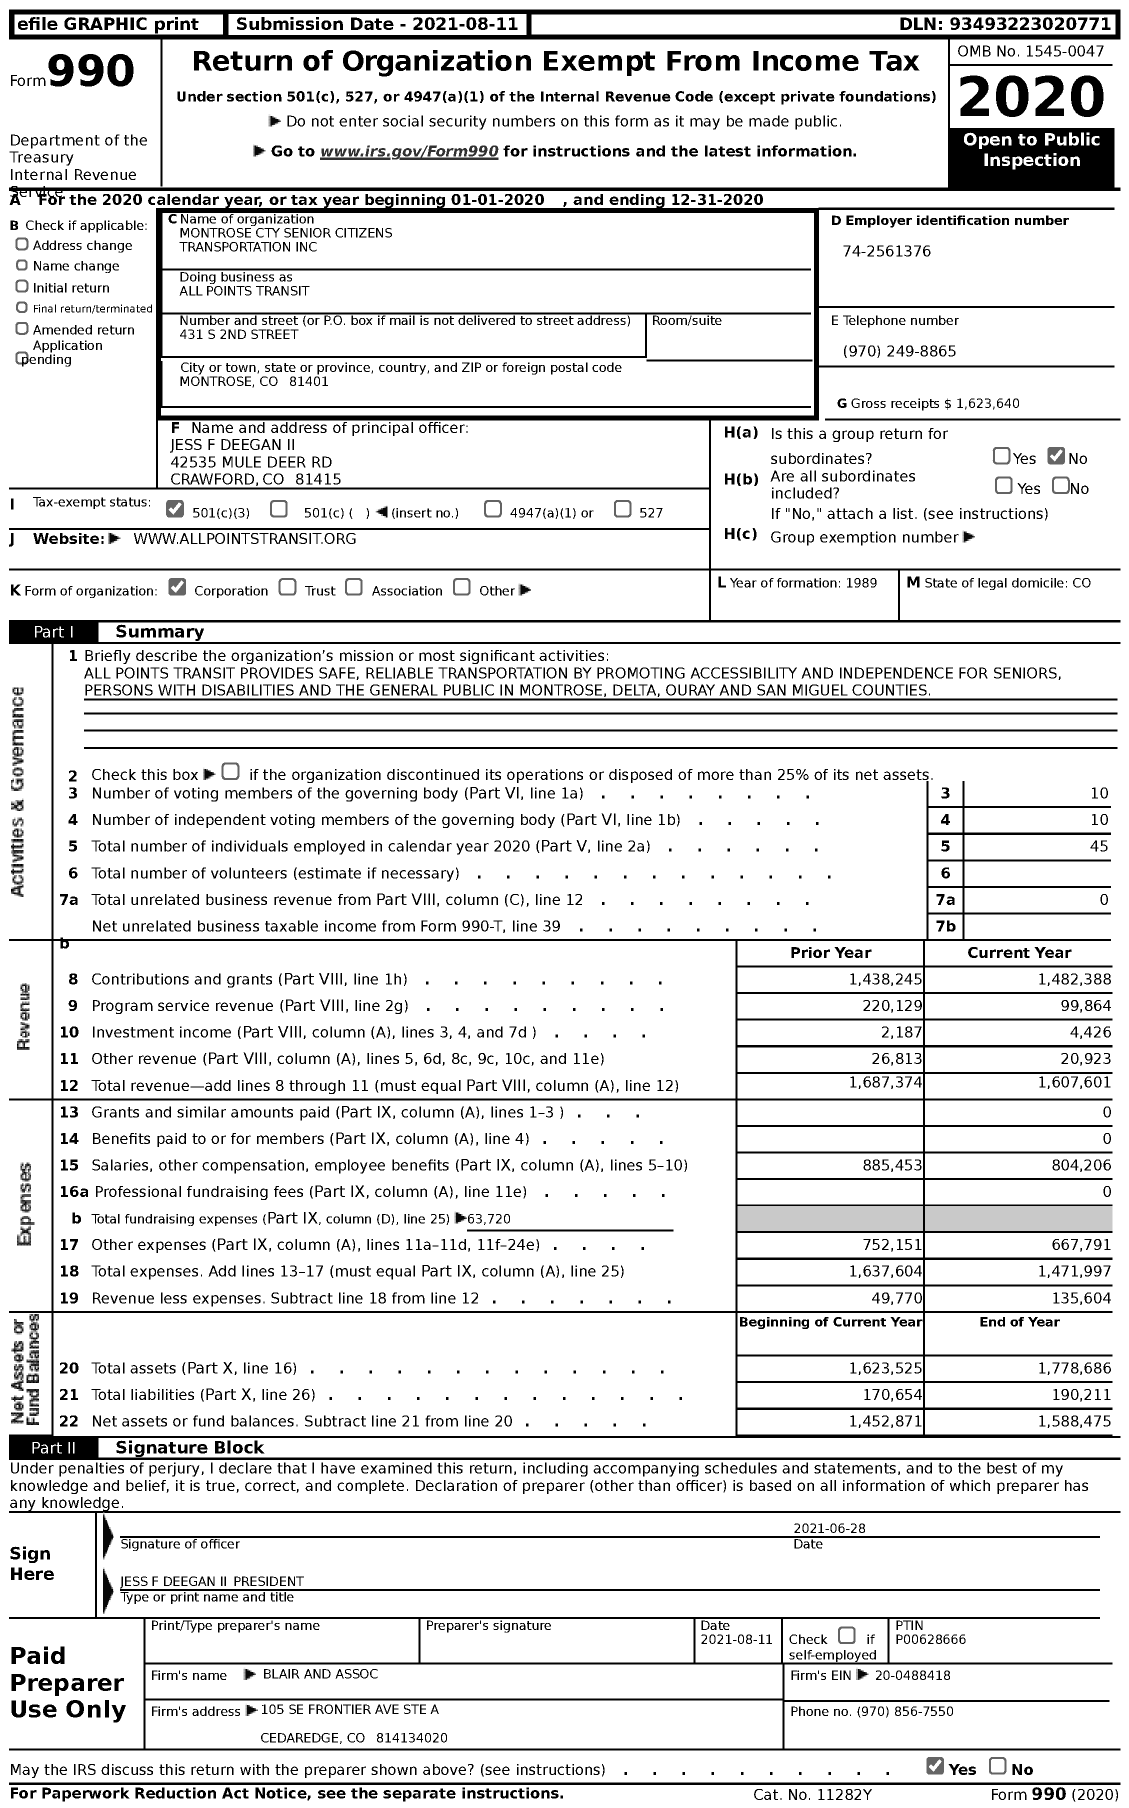 Image of first page of 2020 Form 990 for All Points Transit